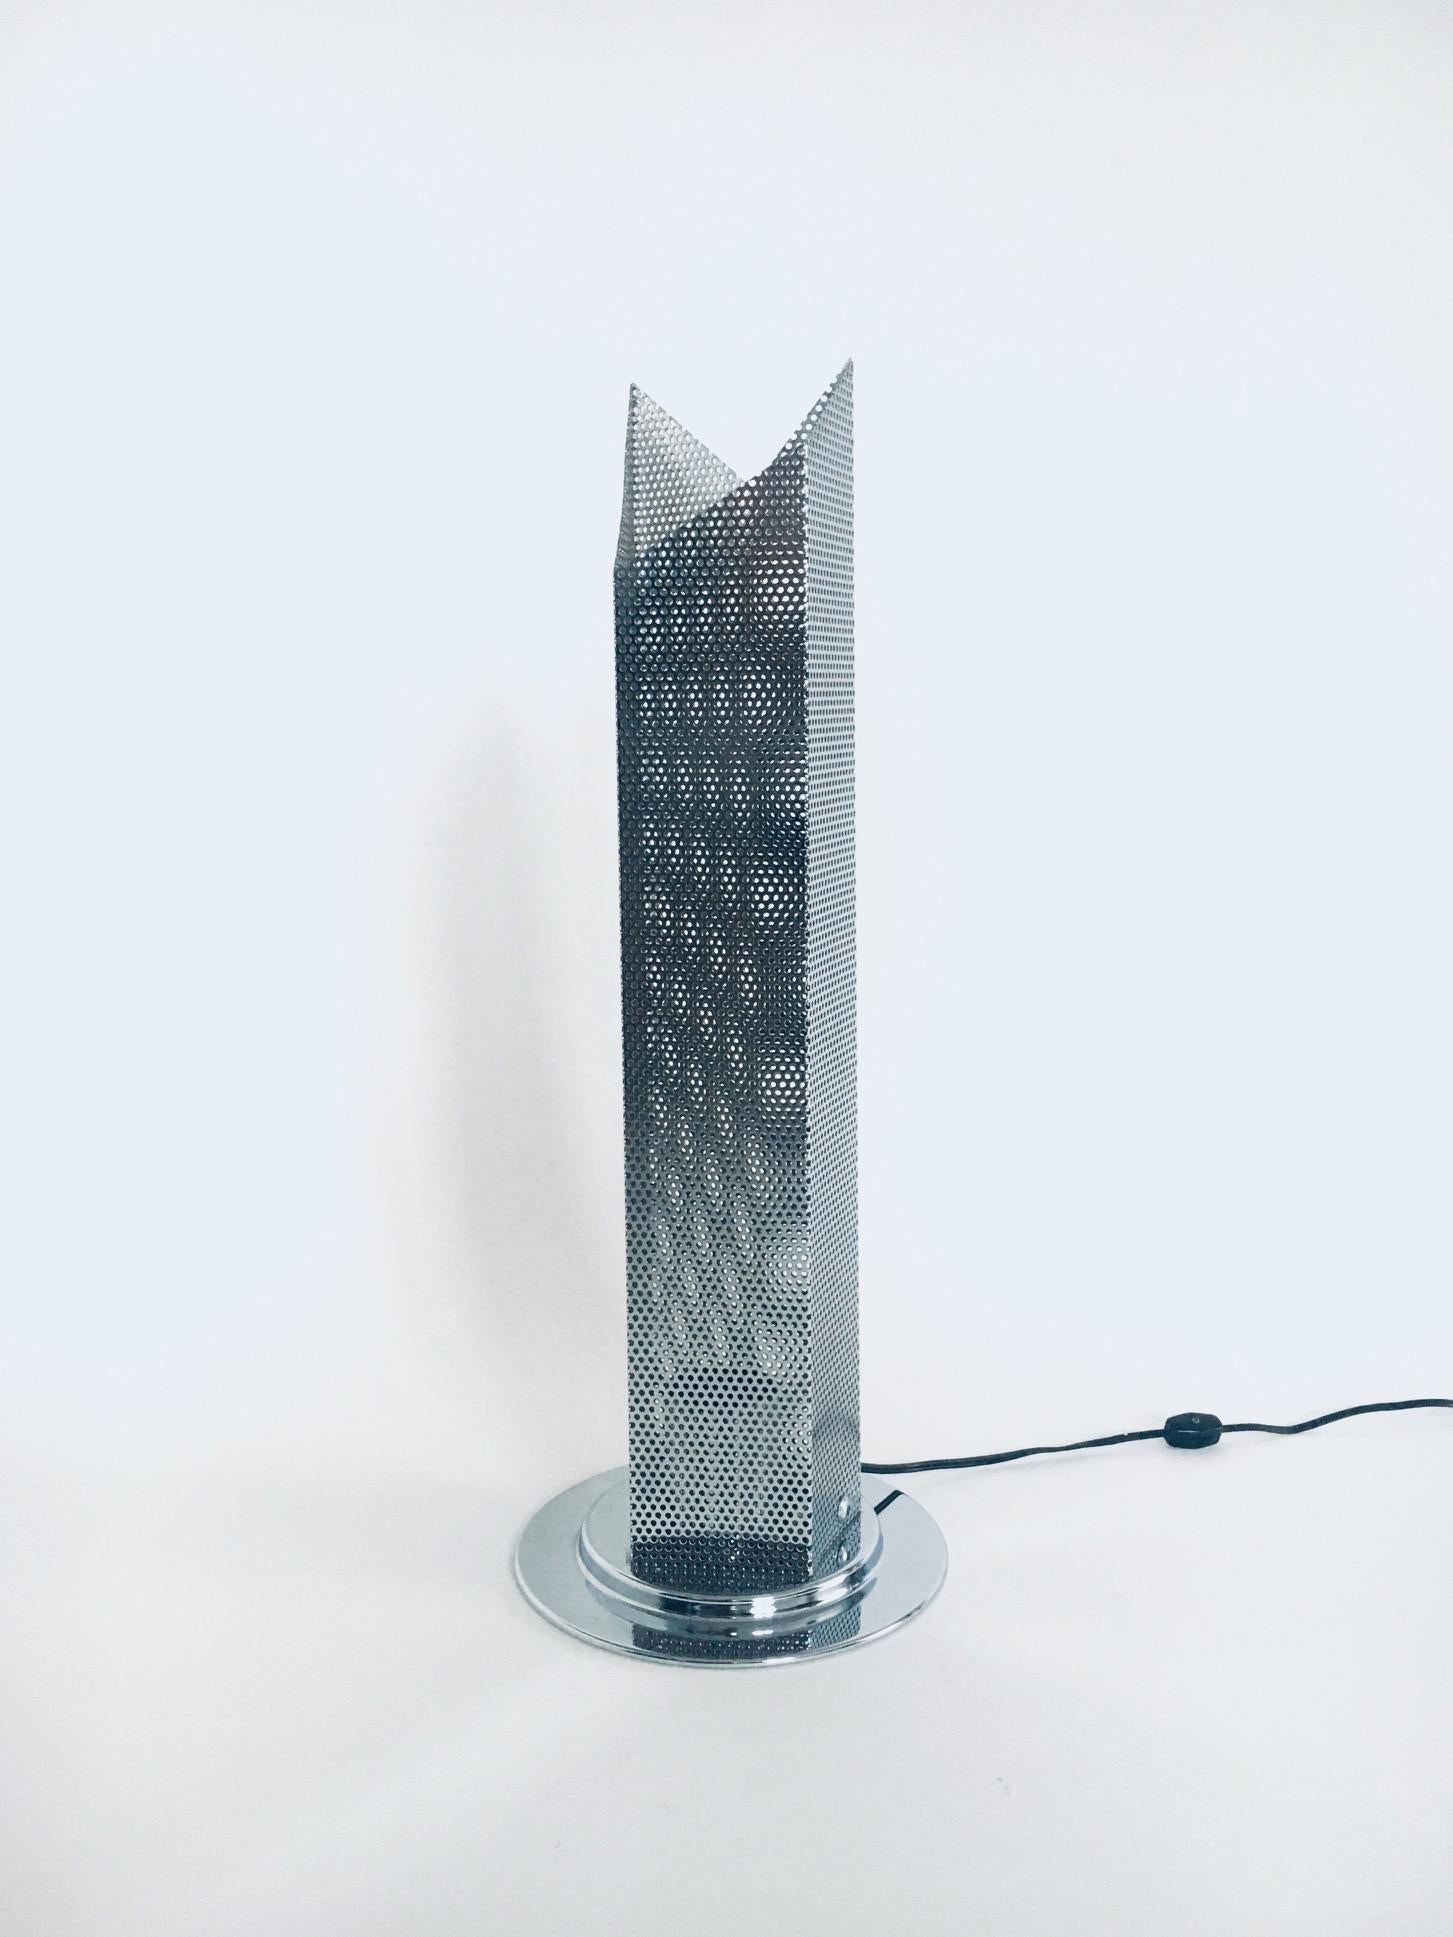 Late 20th Century Postmodern Architectural Design Chrome Steel Perforated Metal Table Lamp, Italy  For Sale